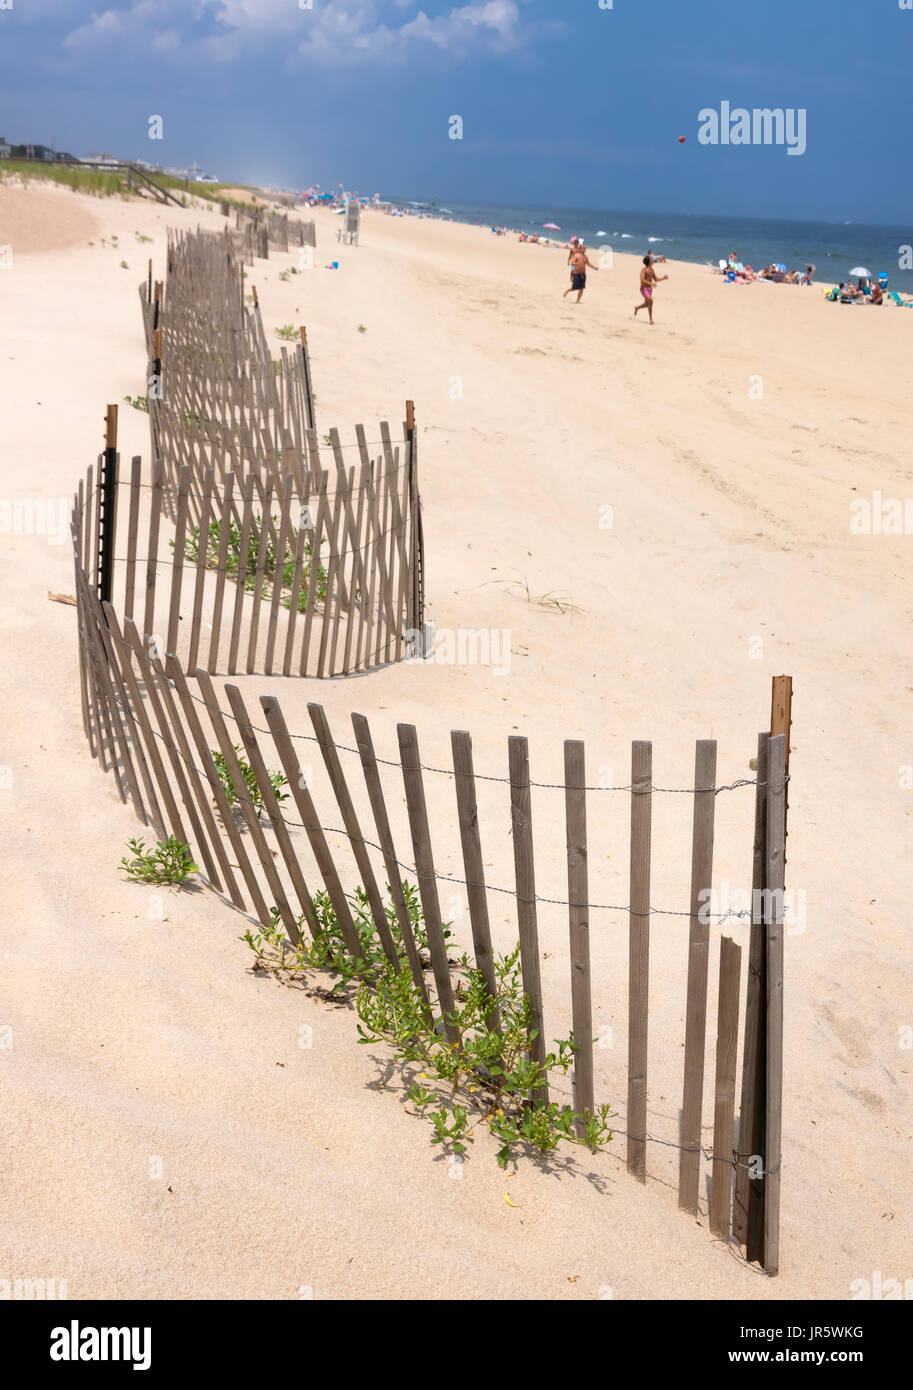 Beachfront fence used to prevent drifting sand and beach erosion in Sea Girt, New Jersey, United States. Stock Photo